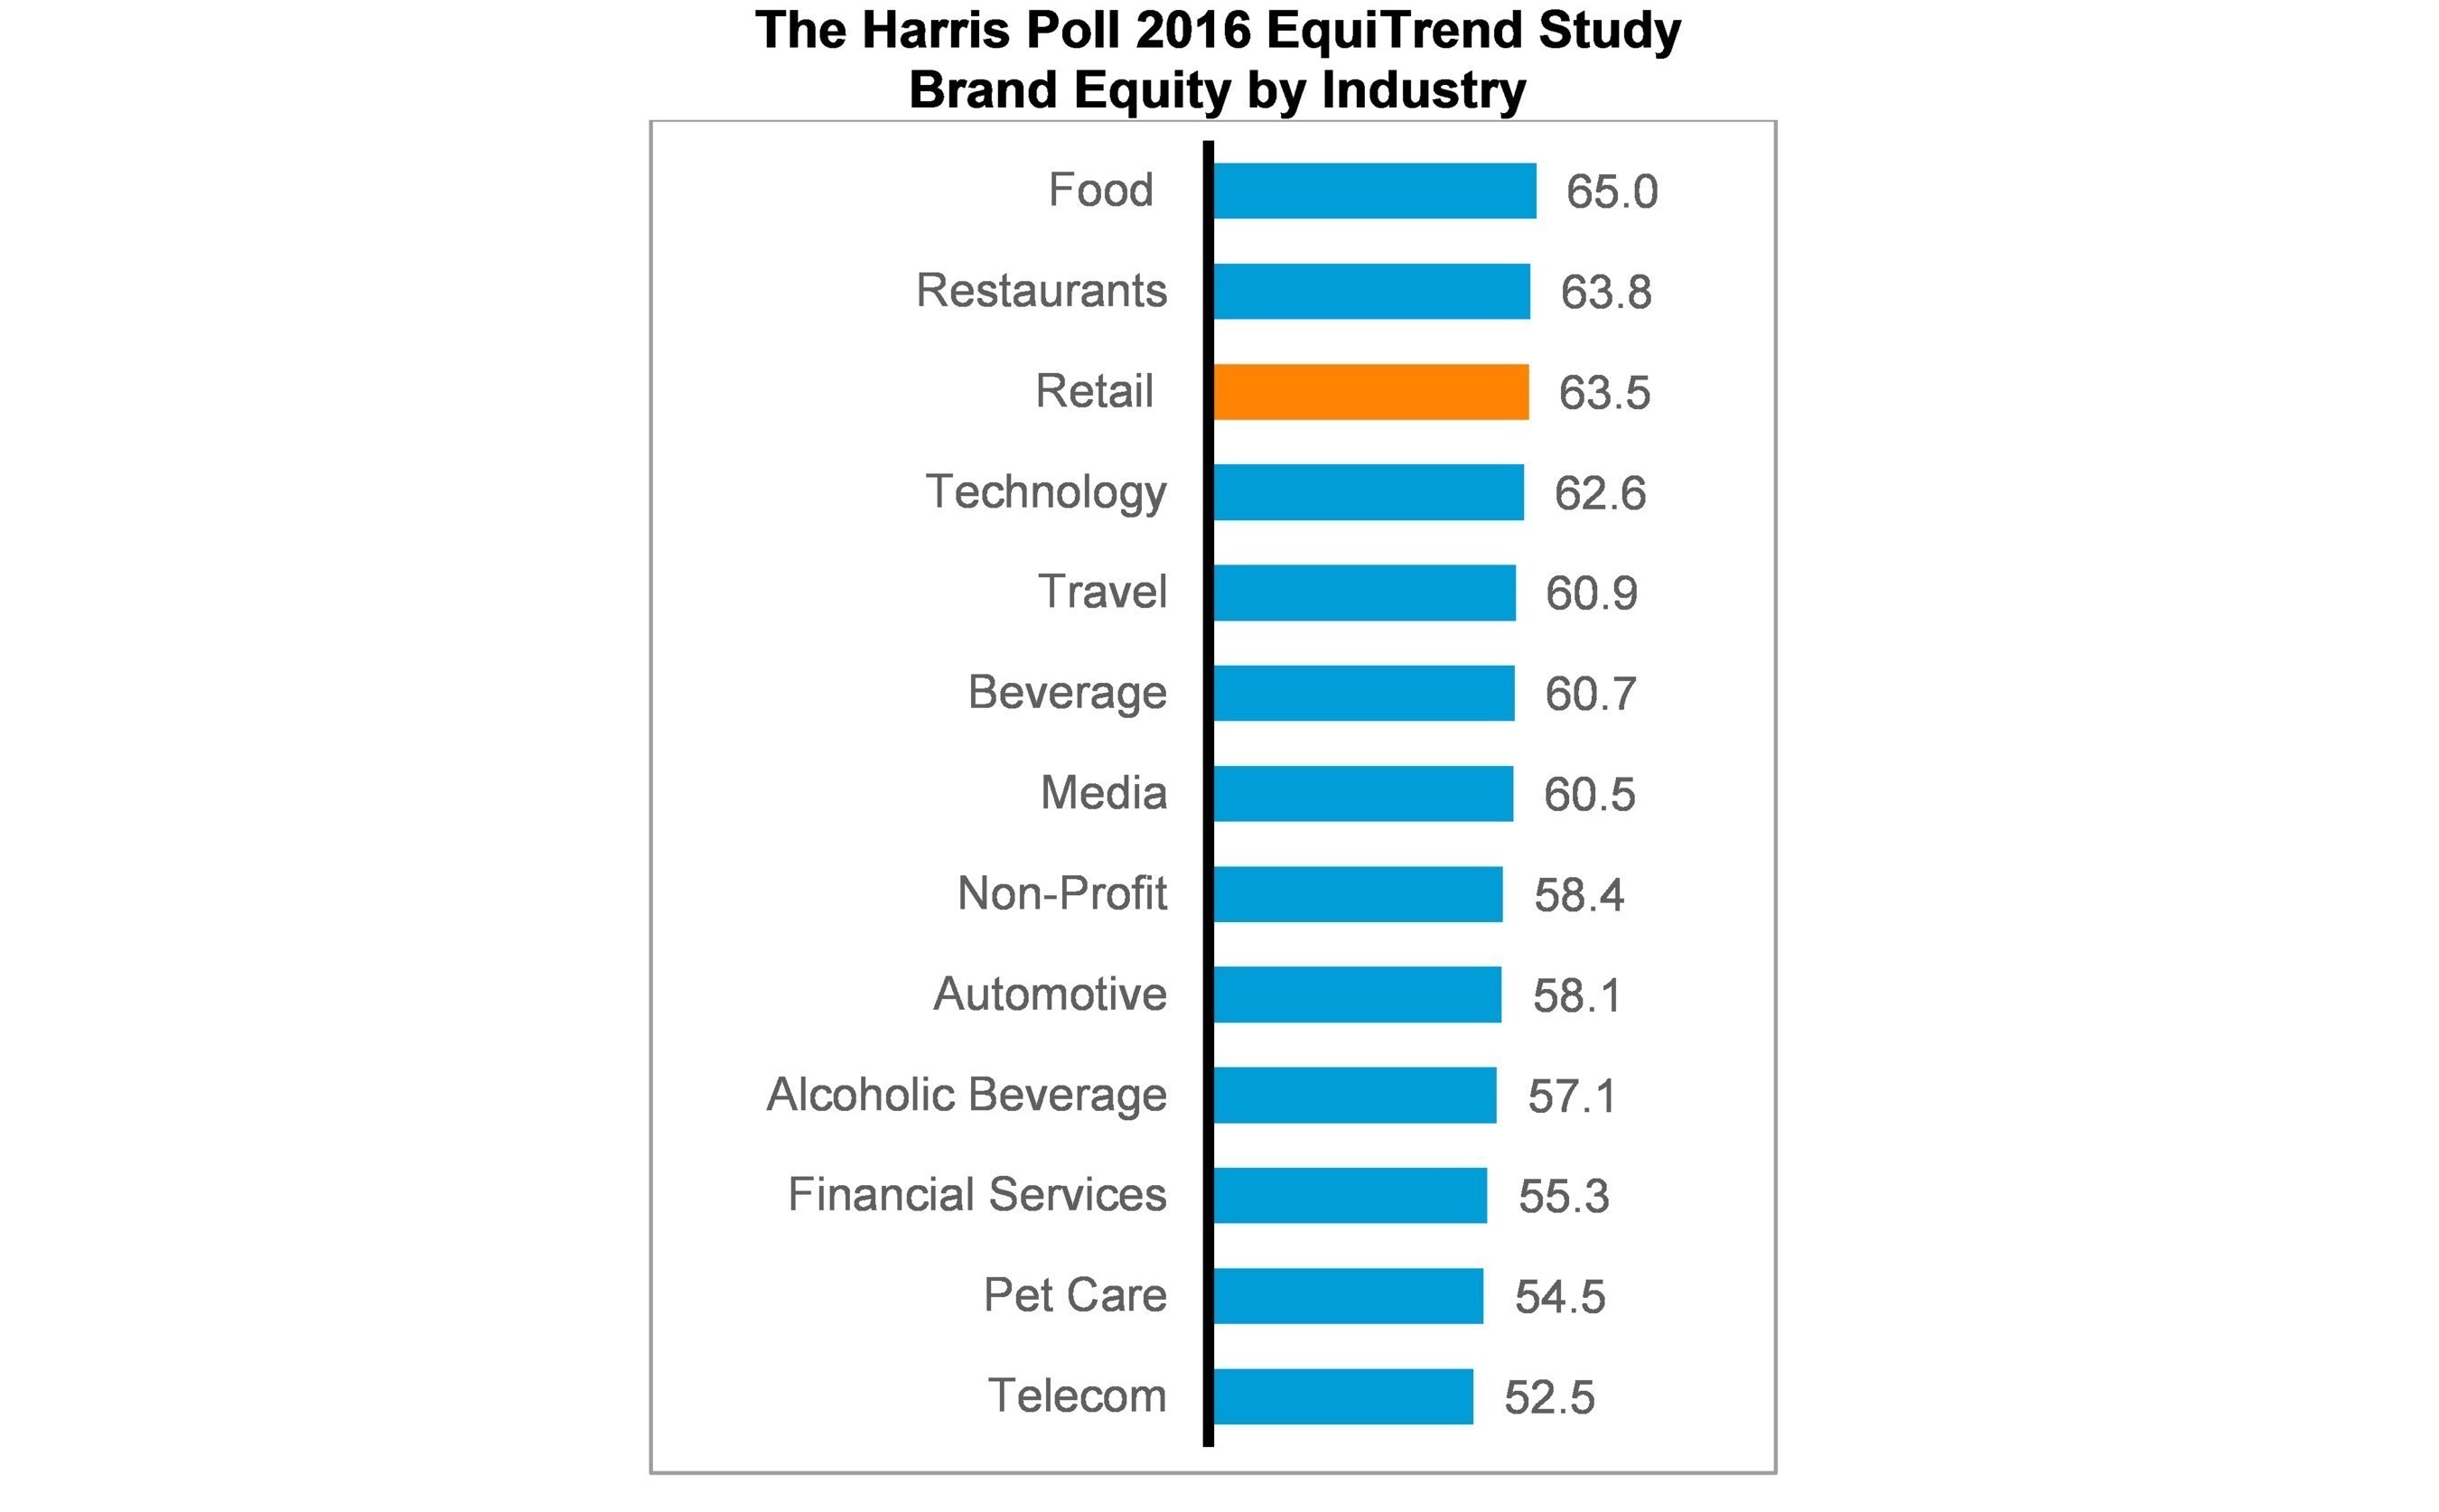 Brand equity by industry